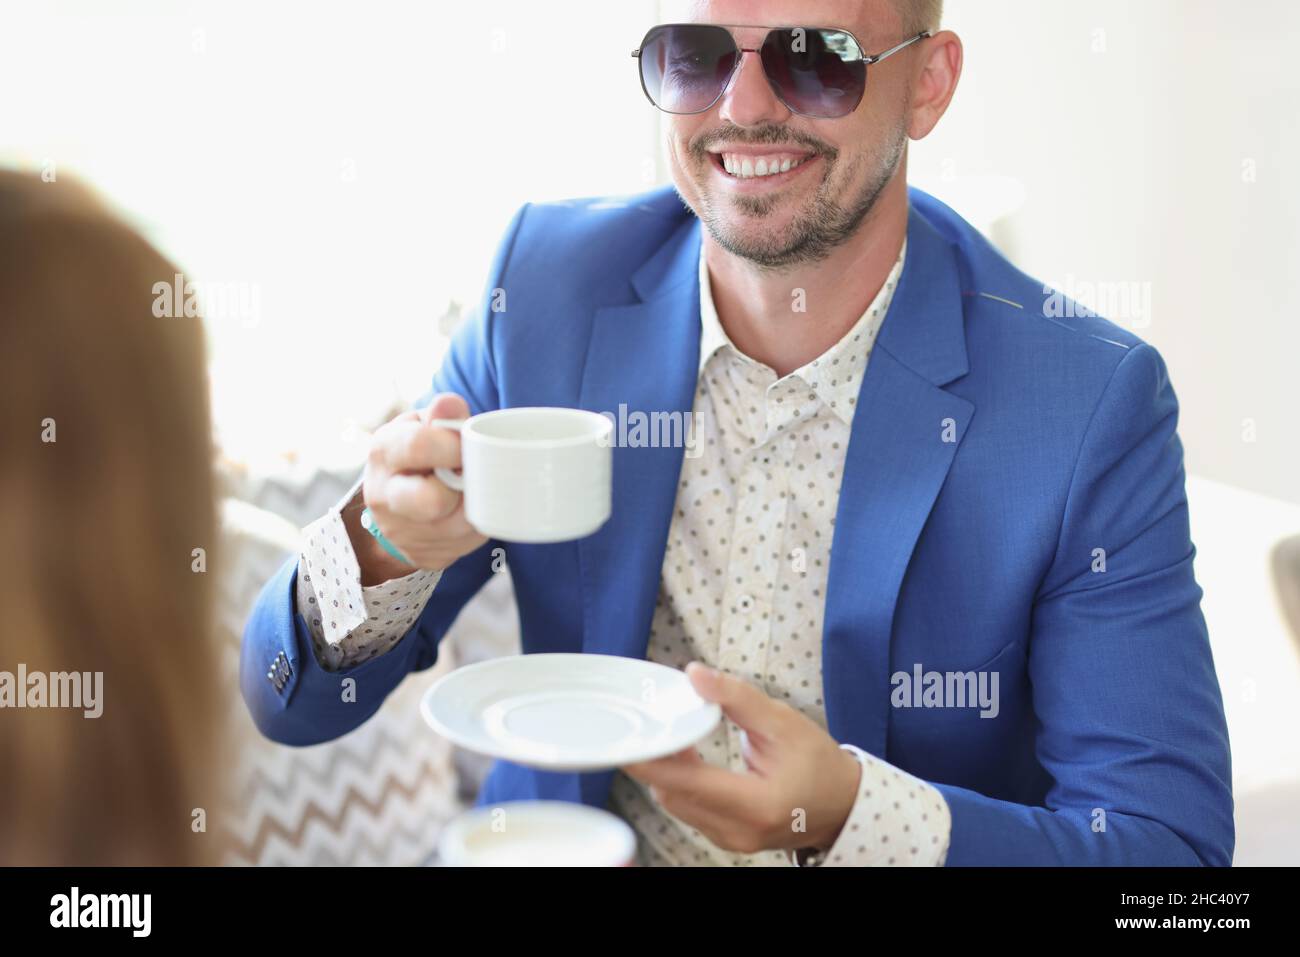 Well dressed smiling man drinking coffee in cafe on business meeting with partner Stock Photo